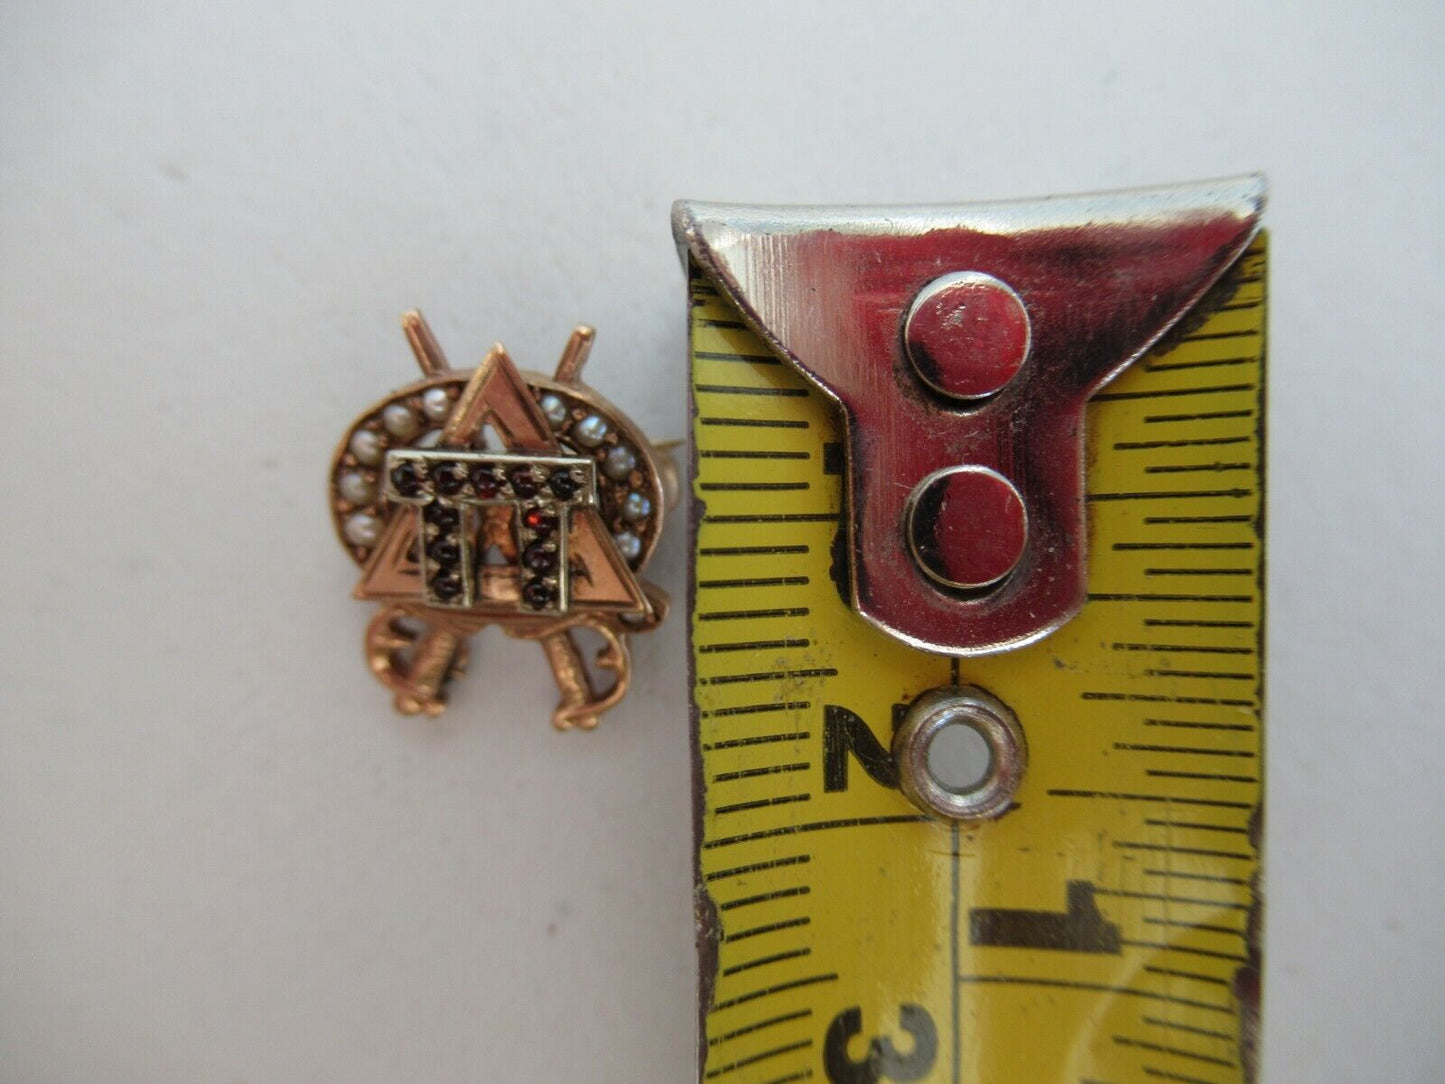 USA FRATERNITY PIN PI DELTA. MADE IN GOLD. 1595